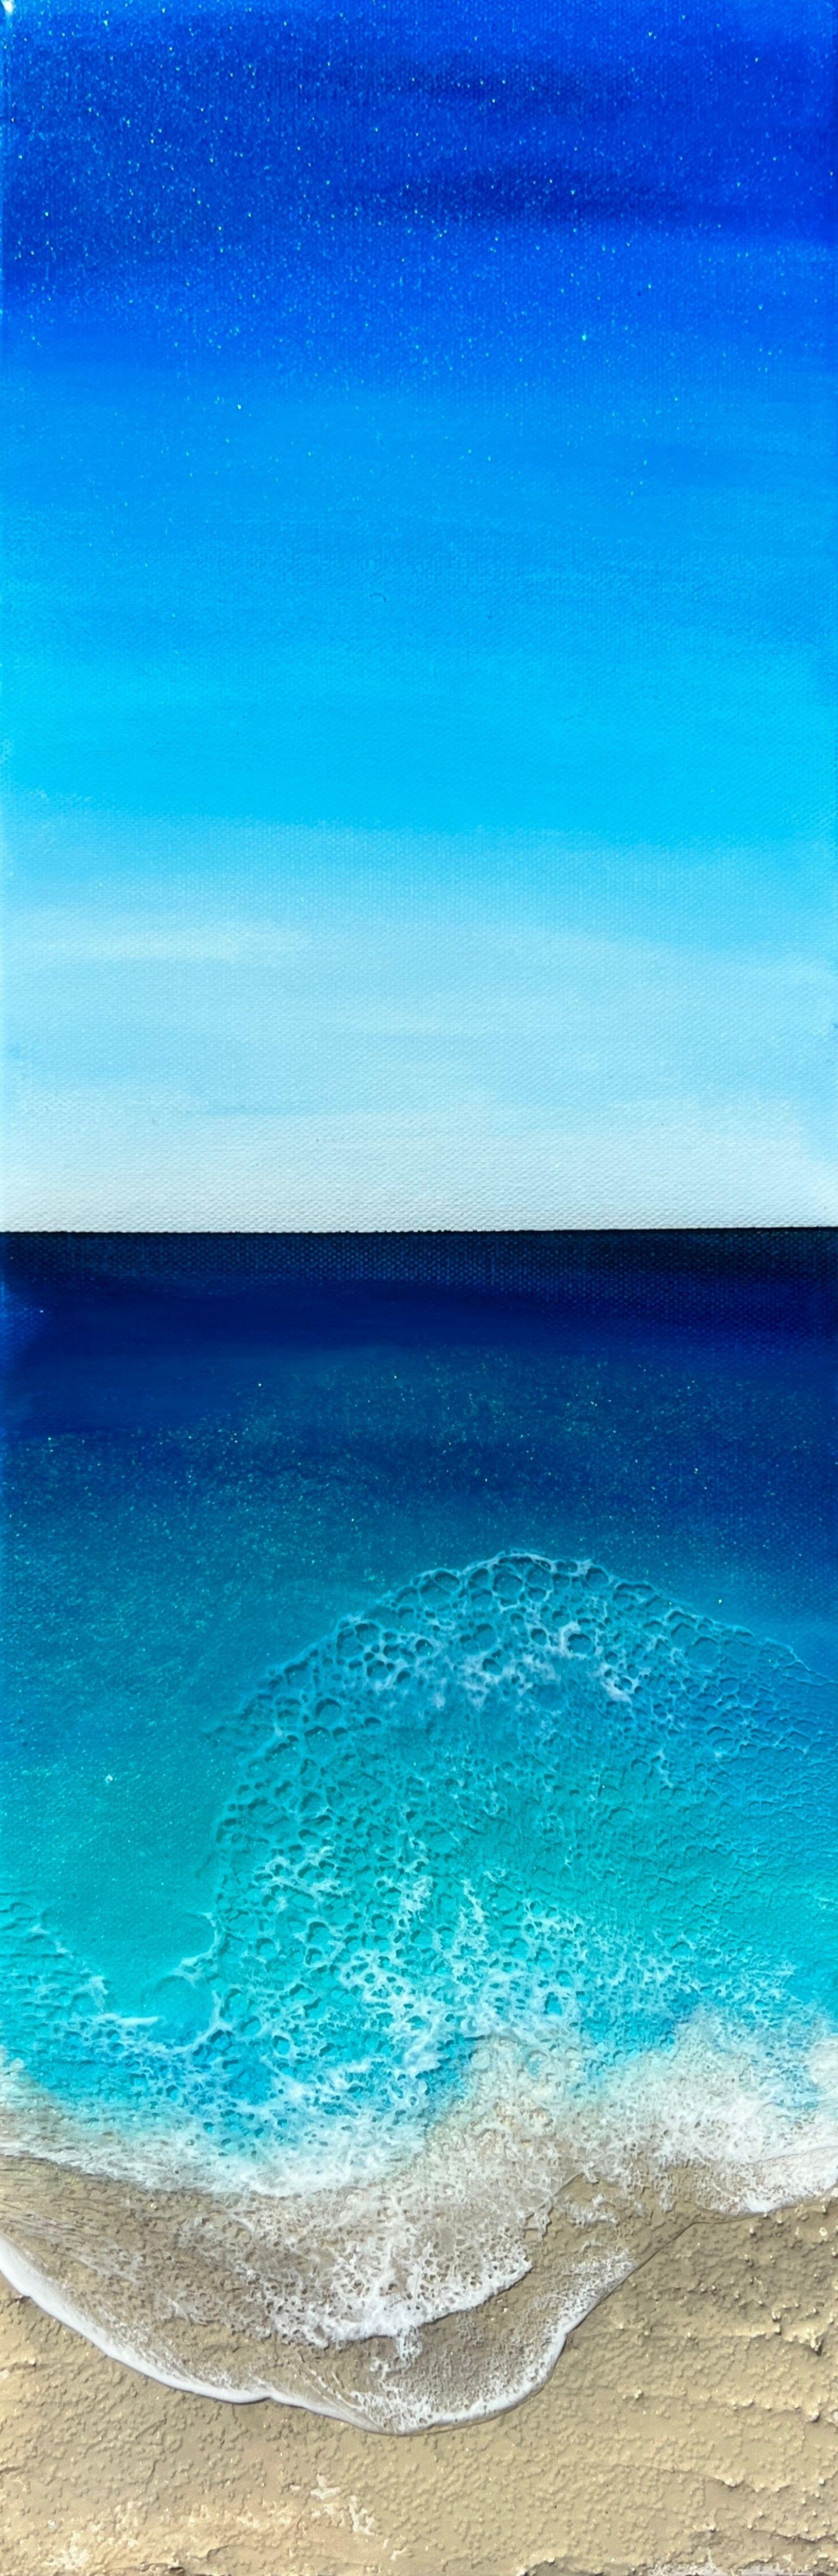 Unique ocean and beach paintings with white sand and frothy splashing waves, inspired by the Turks And Caicos Islands  Ocean Seascape Painting with white sand beach and frothy white splashing waves  Different shades of blue, turquoise, teal, aqua,